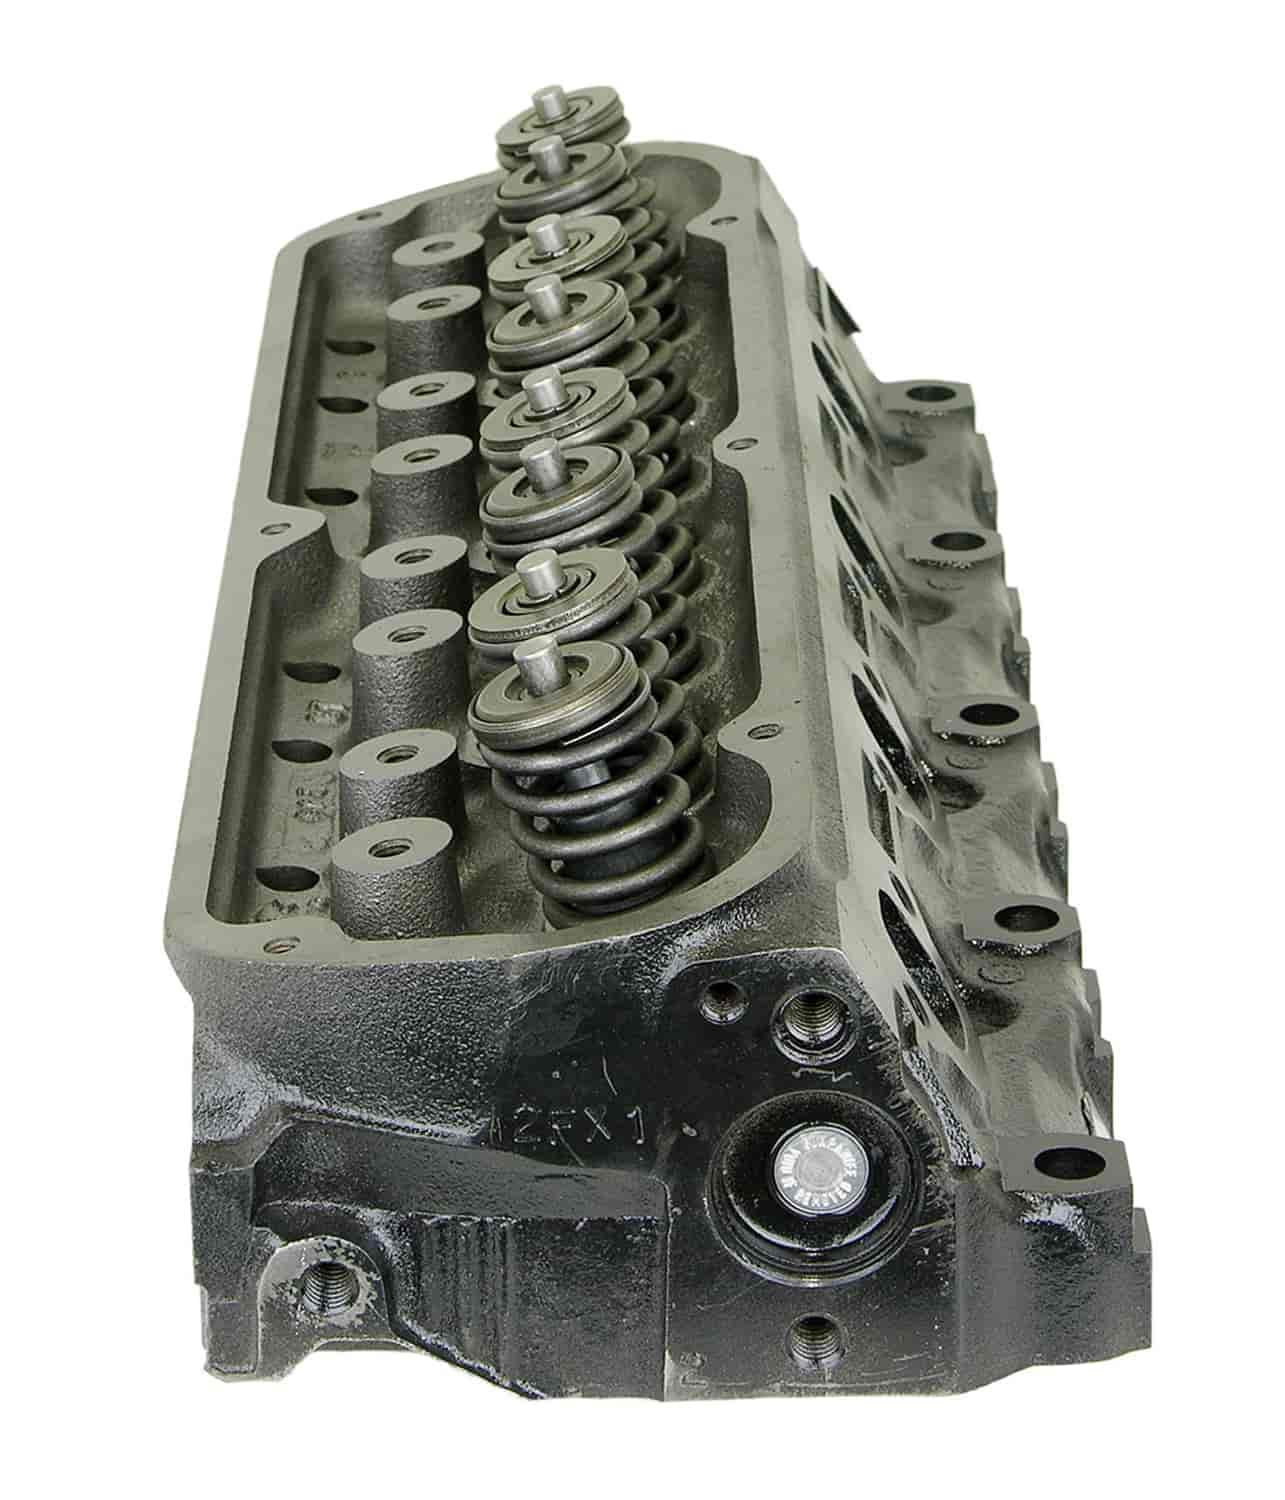 Remanufactured Cylinder Head for 1993-1995 Ford F-Series Truck with 351W/5.8L V8